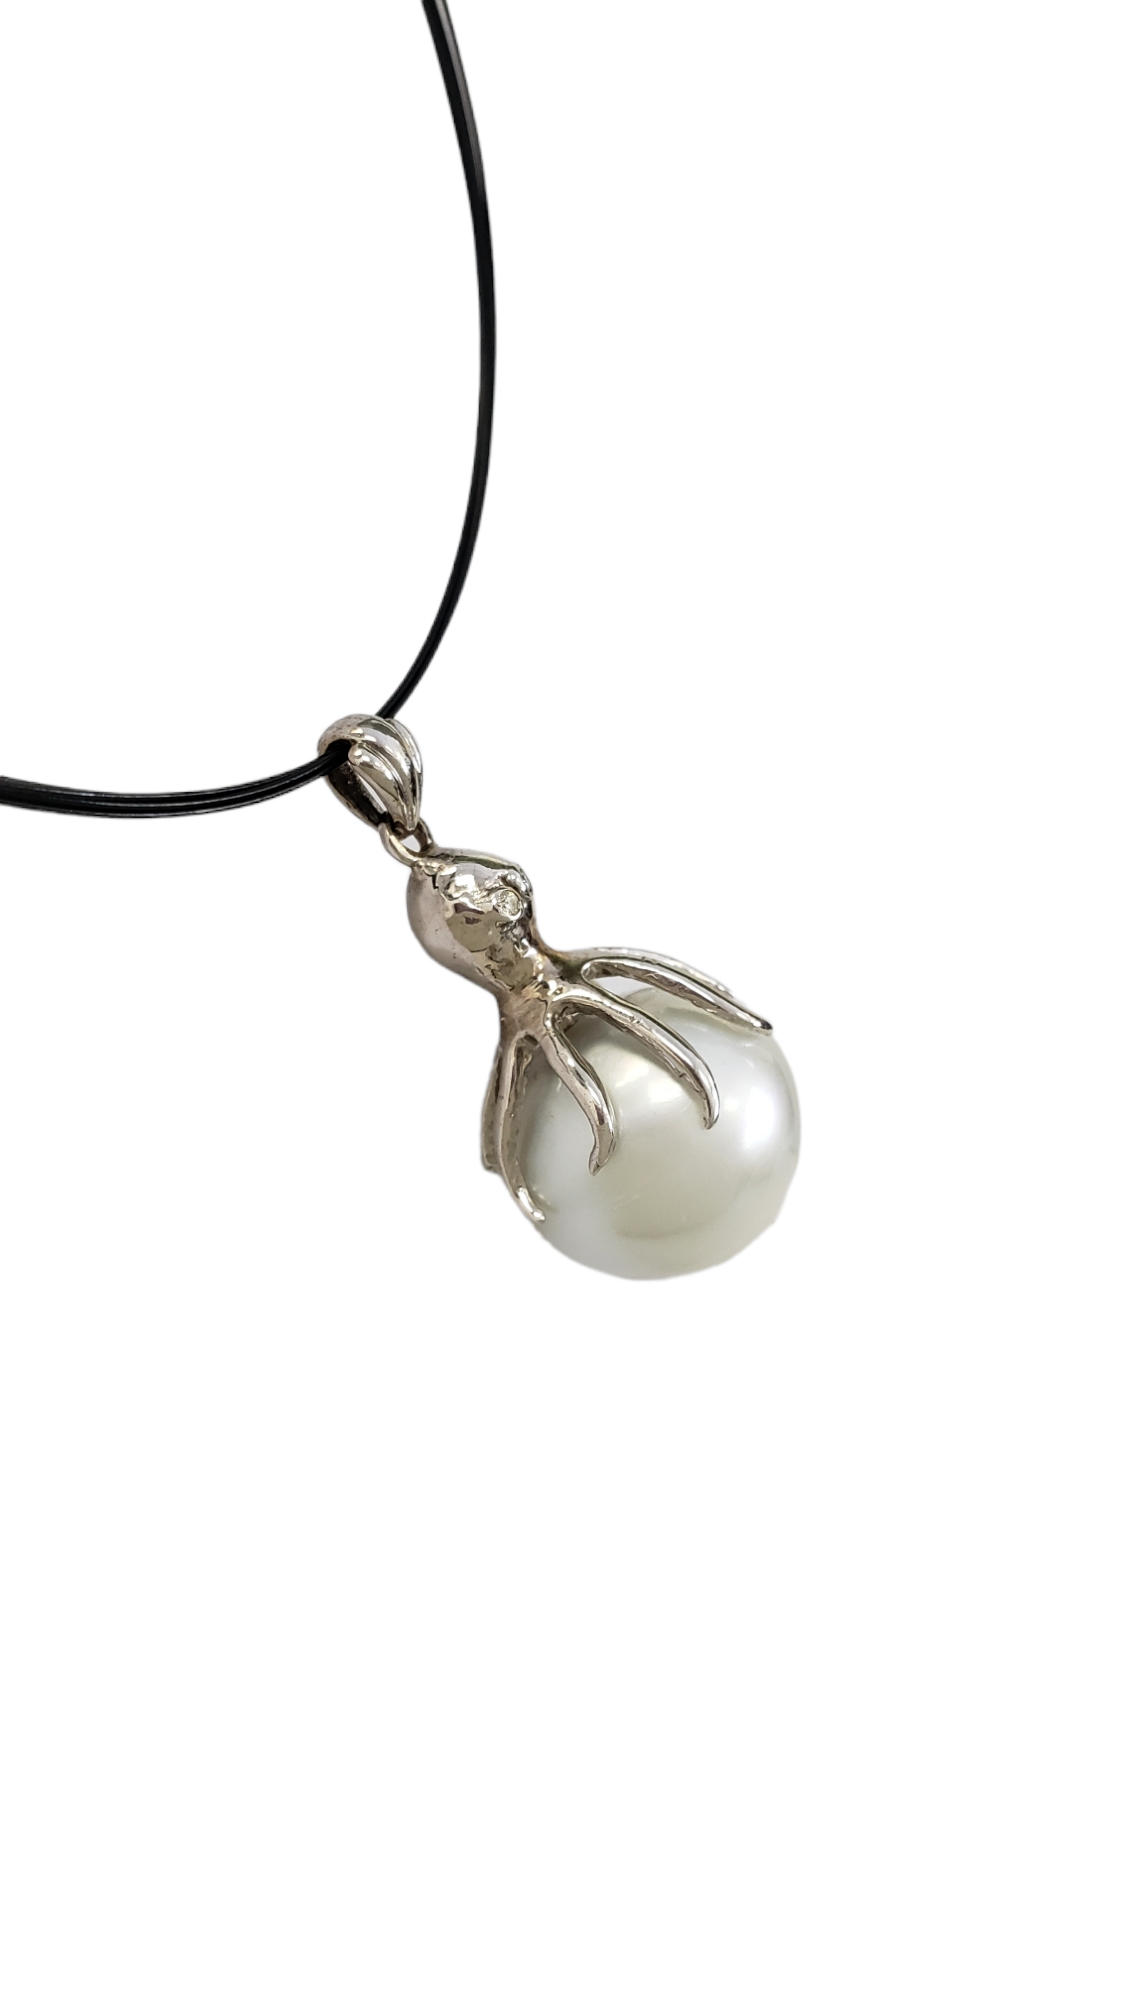 14K White Gold Octopus Holding South Sea White Pearl Pendant on Black Wire